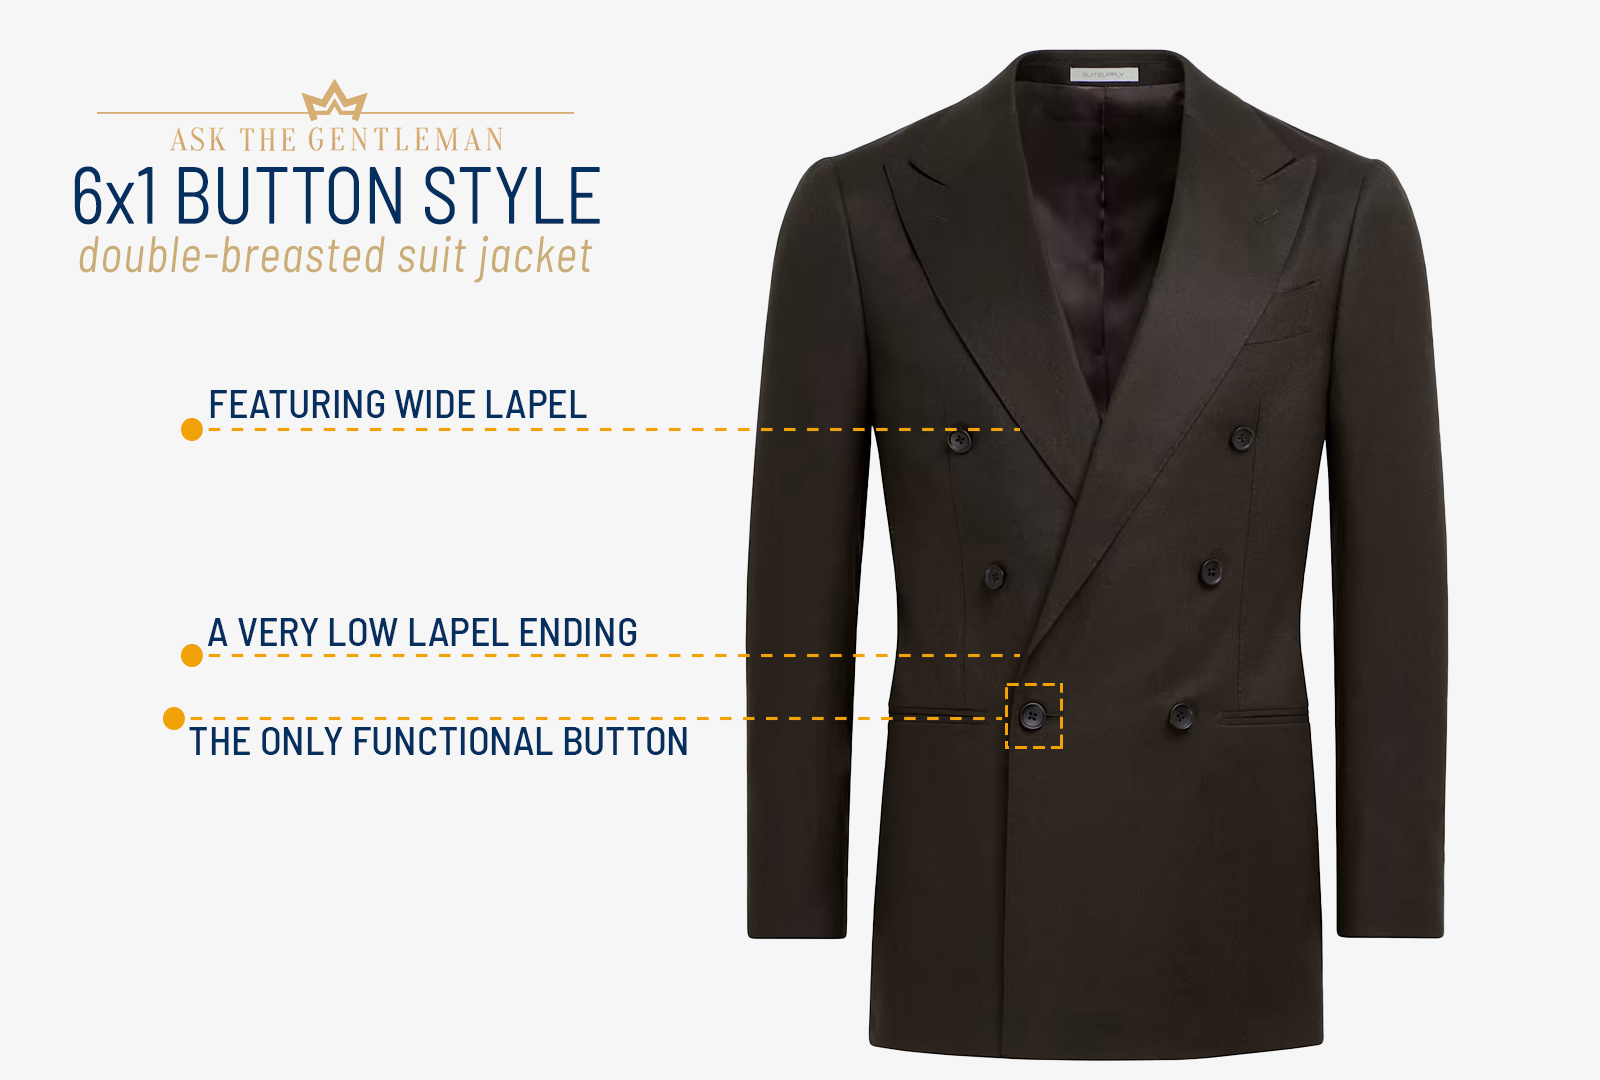 6x1 double-breasted suit jacket style